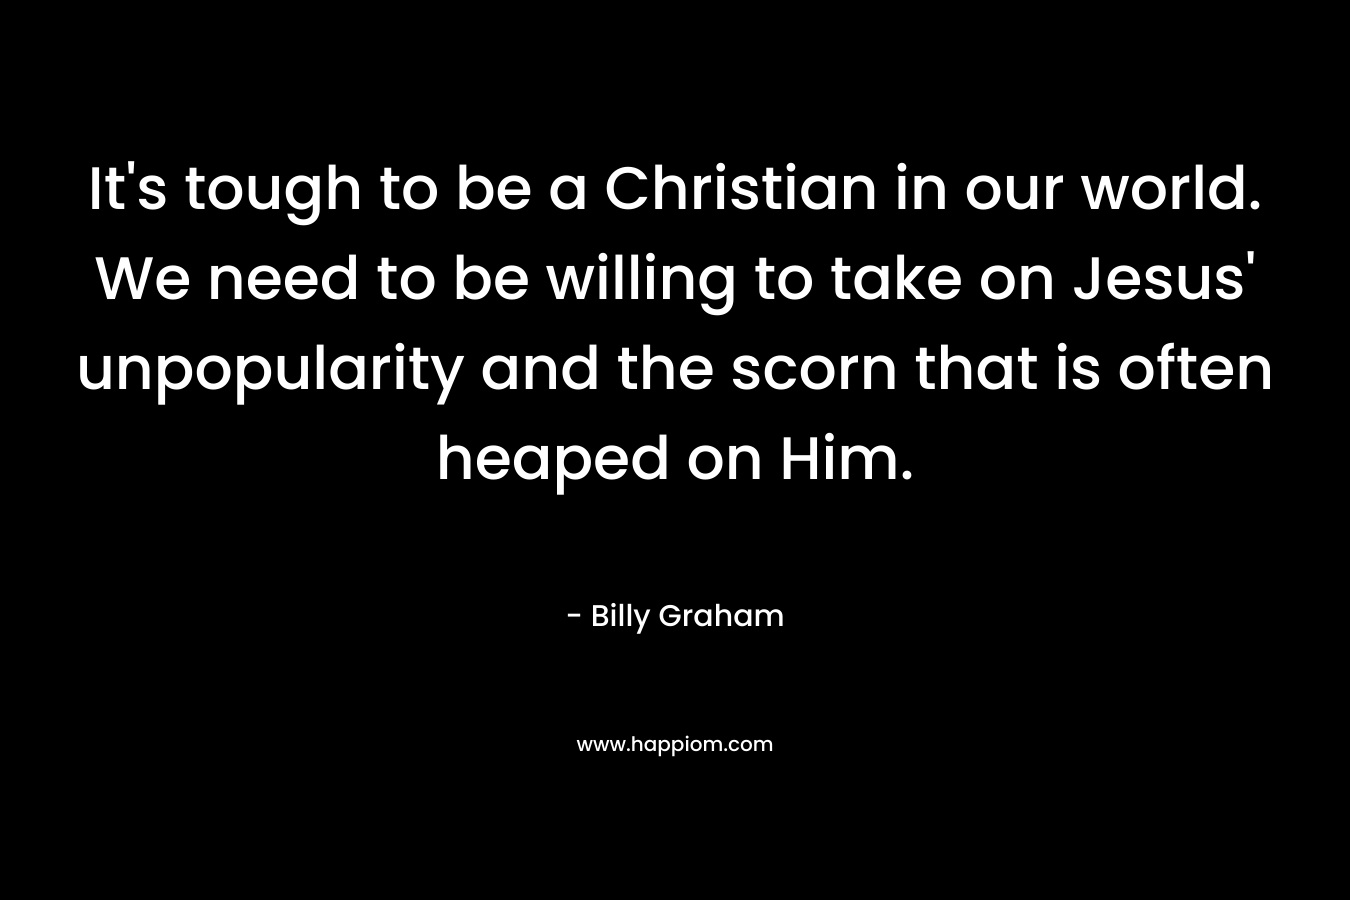 It’s tough to be a Christian in our world. We need to be willing to take on Jesus’ unpopularity and the scorn that is often heaped on Him. – Billy Graham